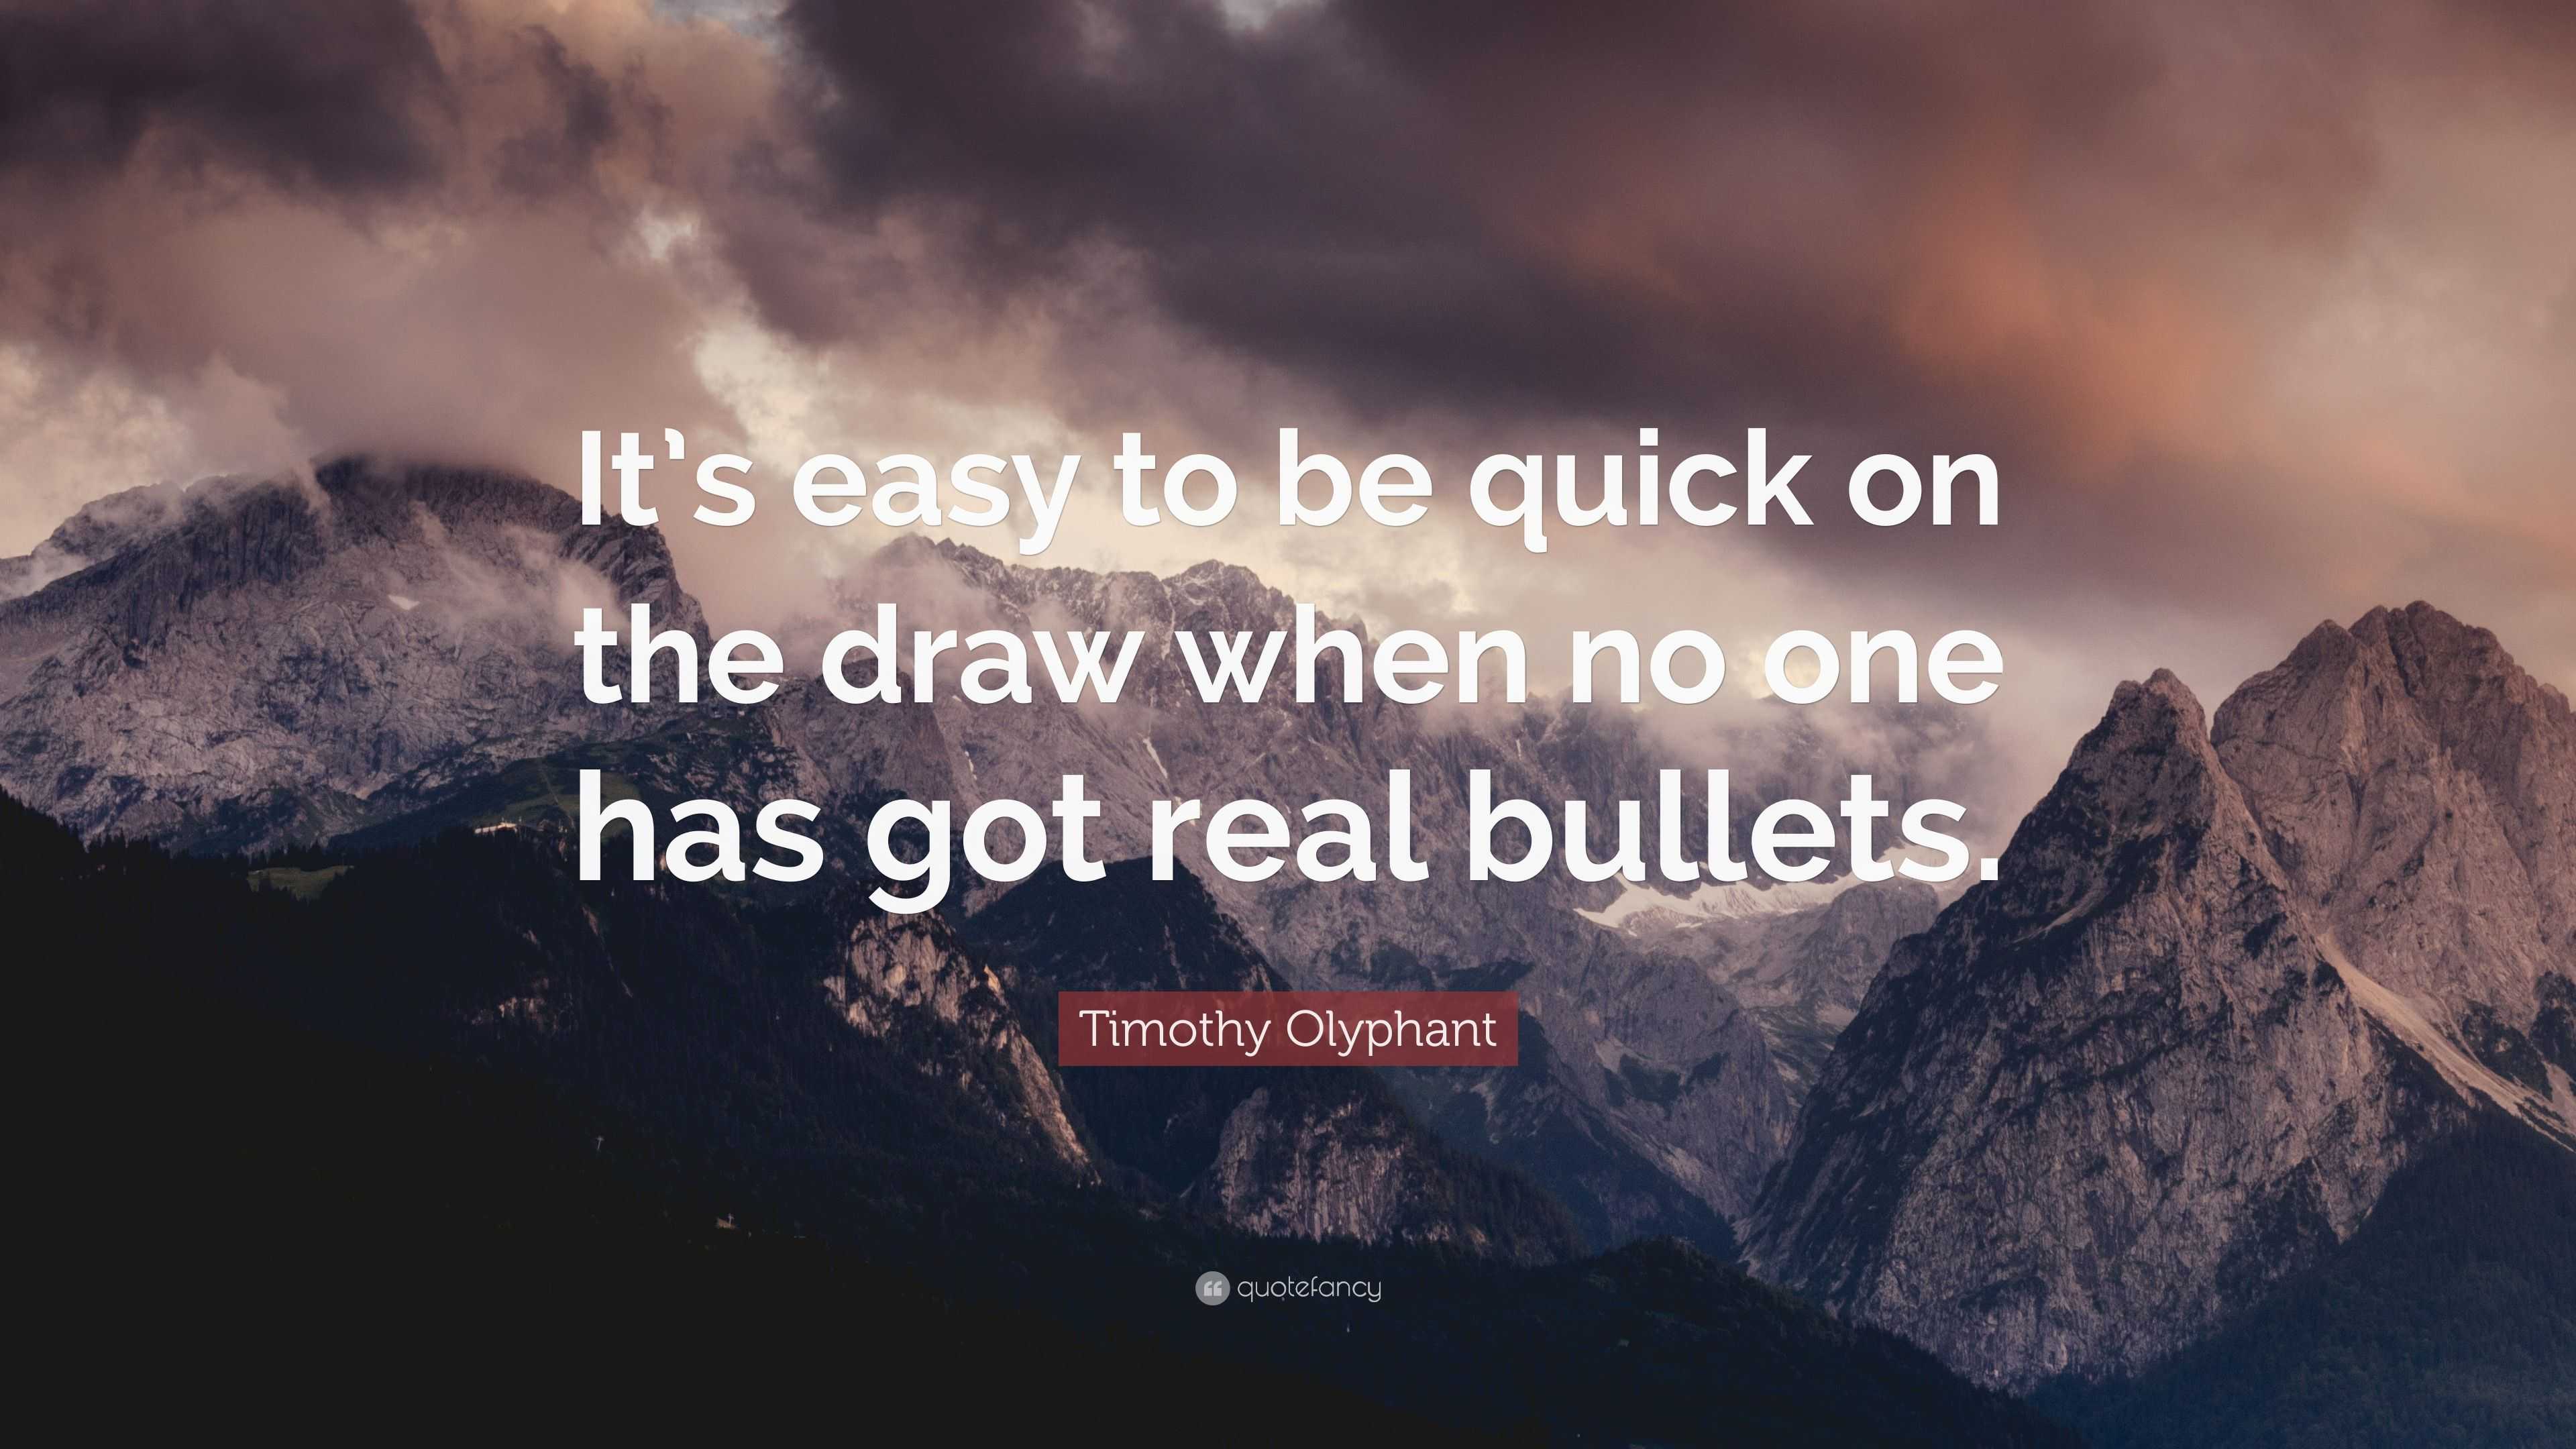 Timothy Olyphant Quote “It’s easy to be quick on the draw when no one